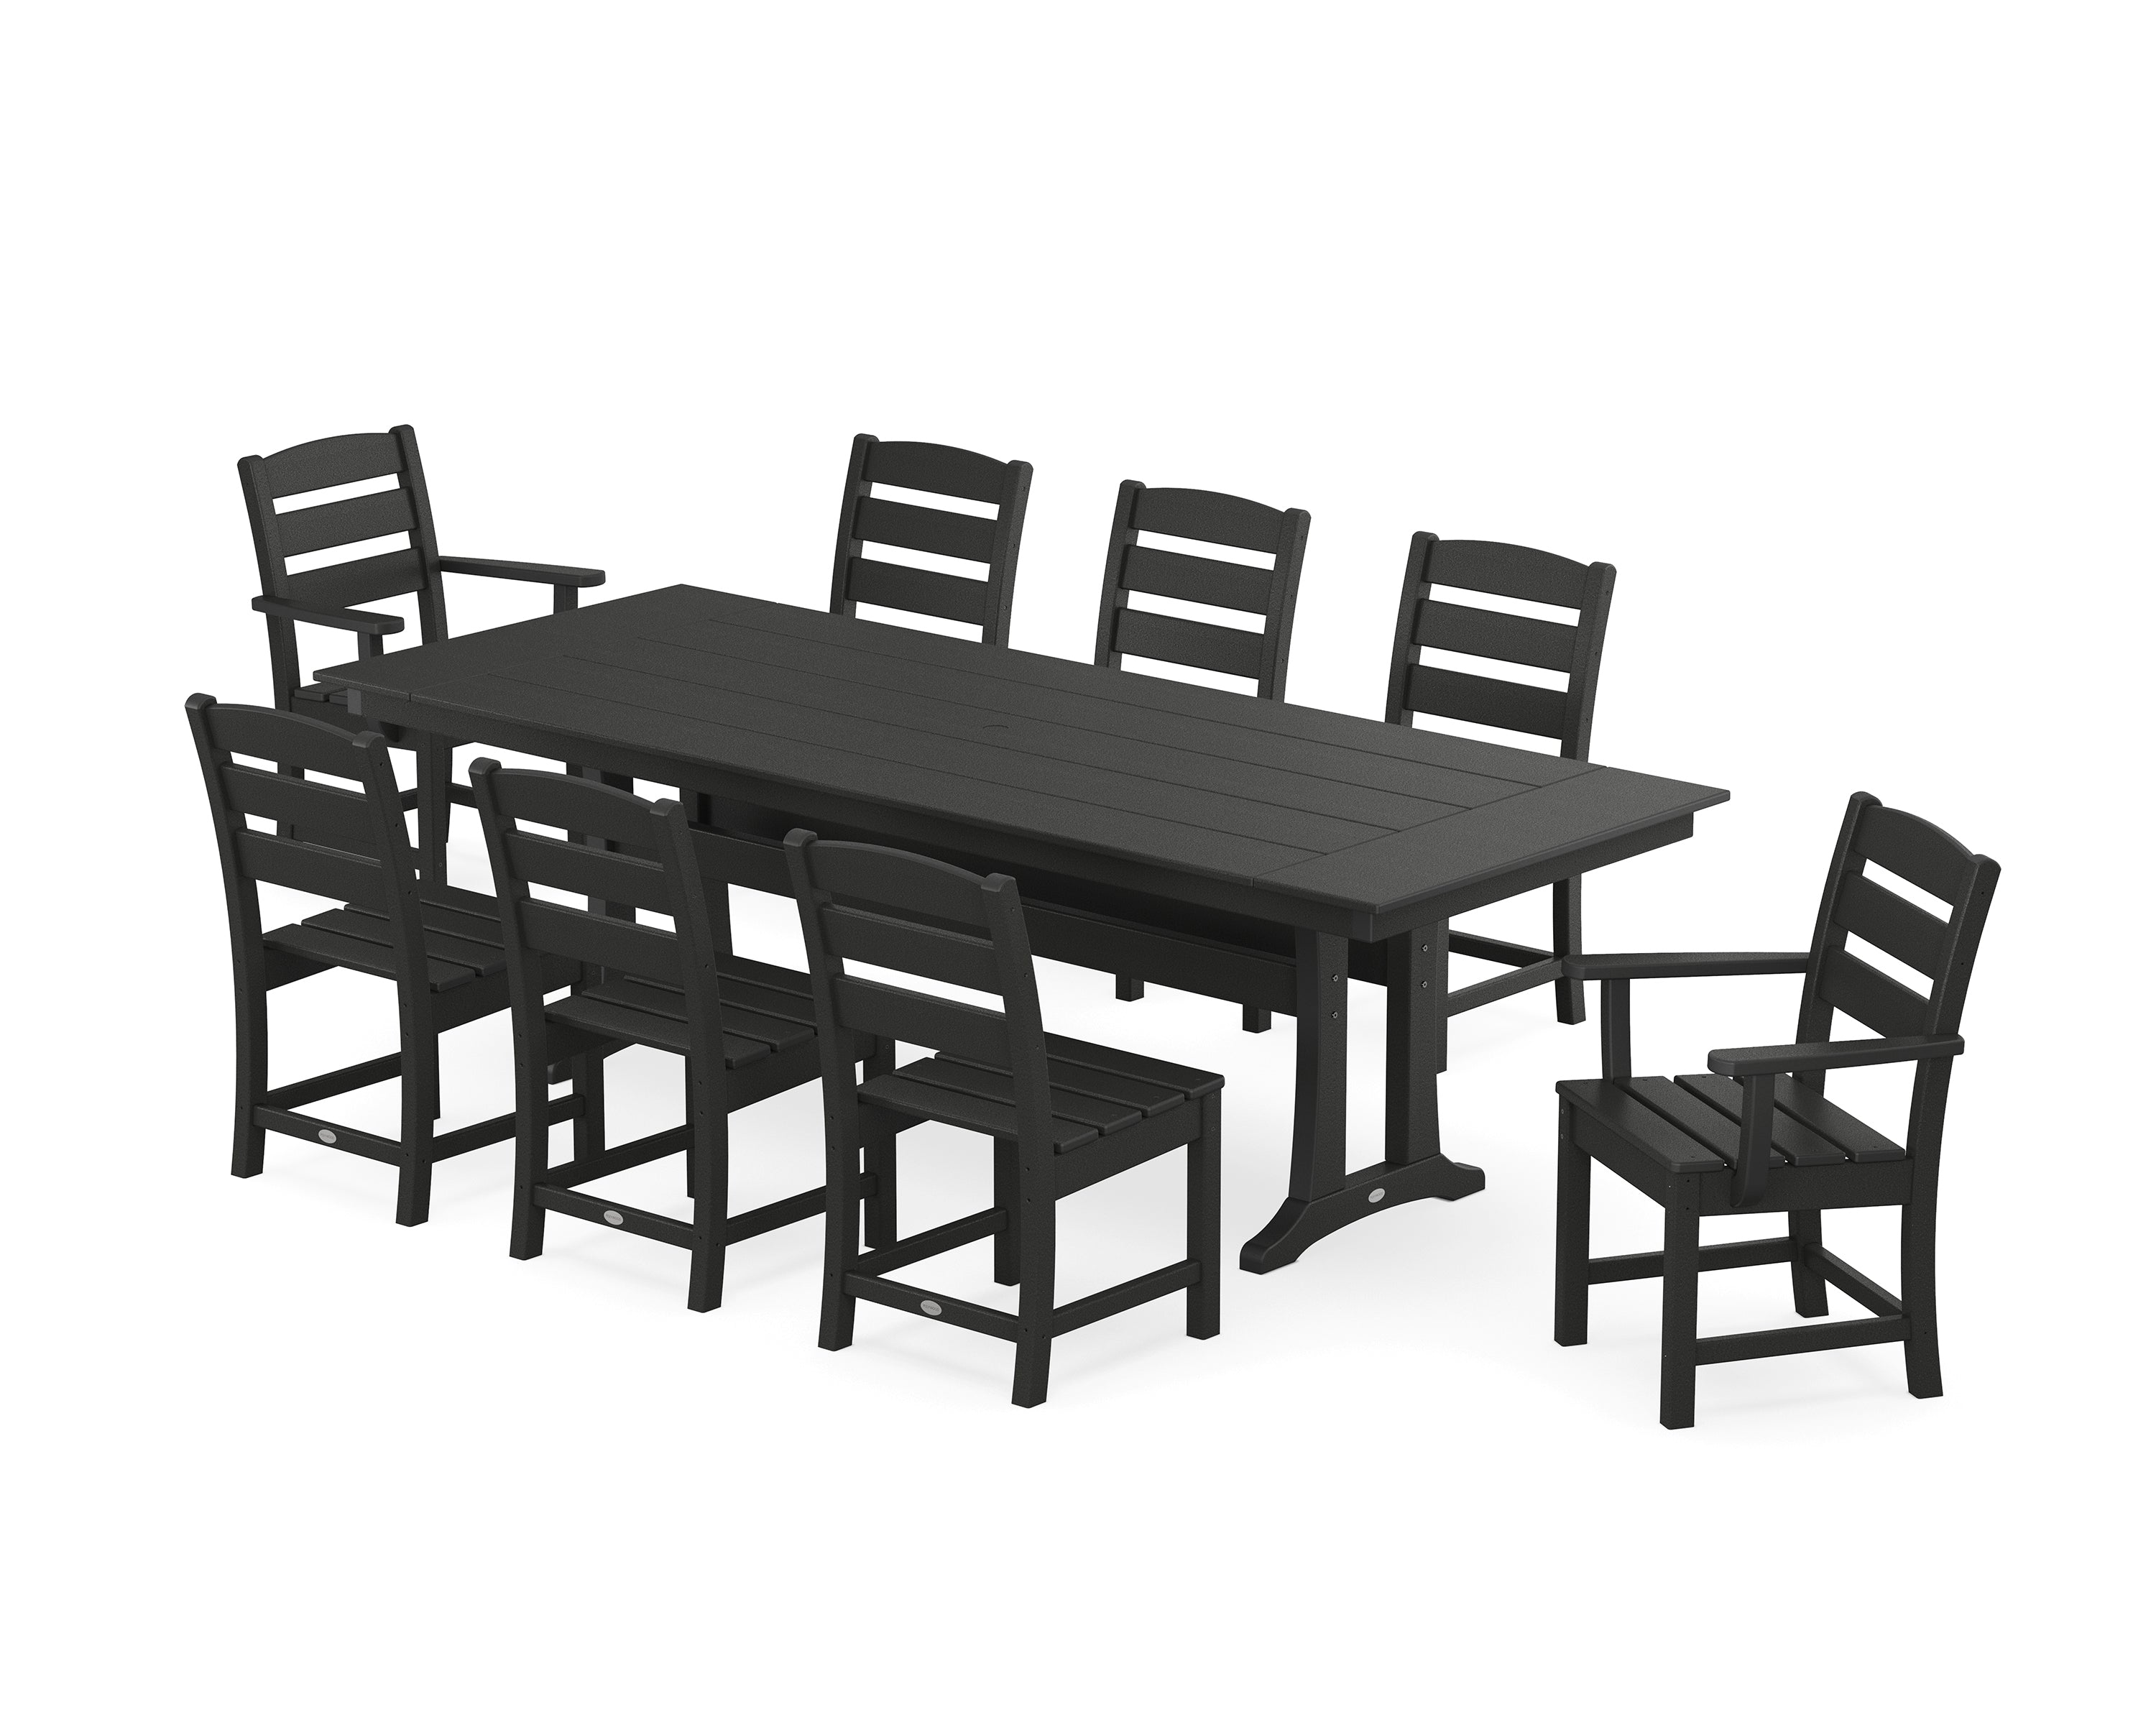 POLYWOOD® Lakeside 9-Piece Farmhouse Dining Set with Trestle Legs in Black